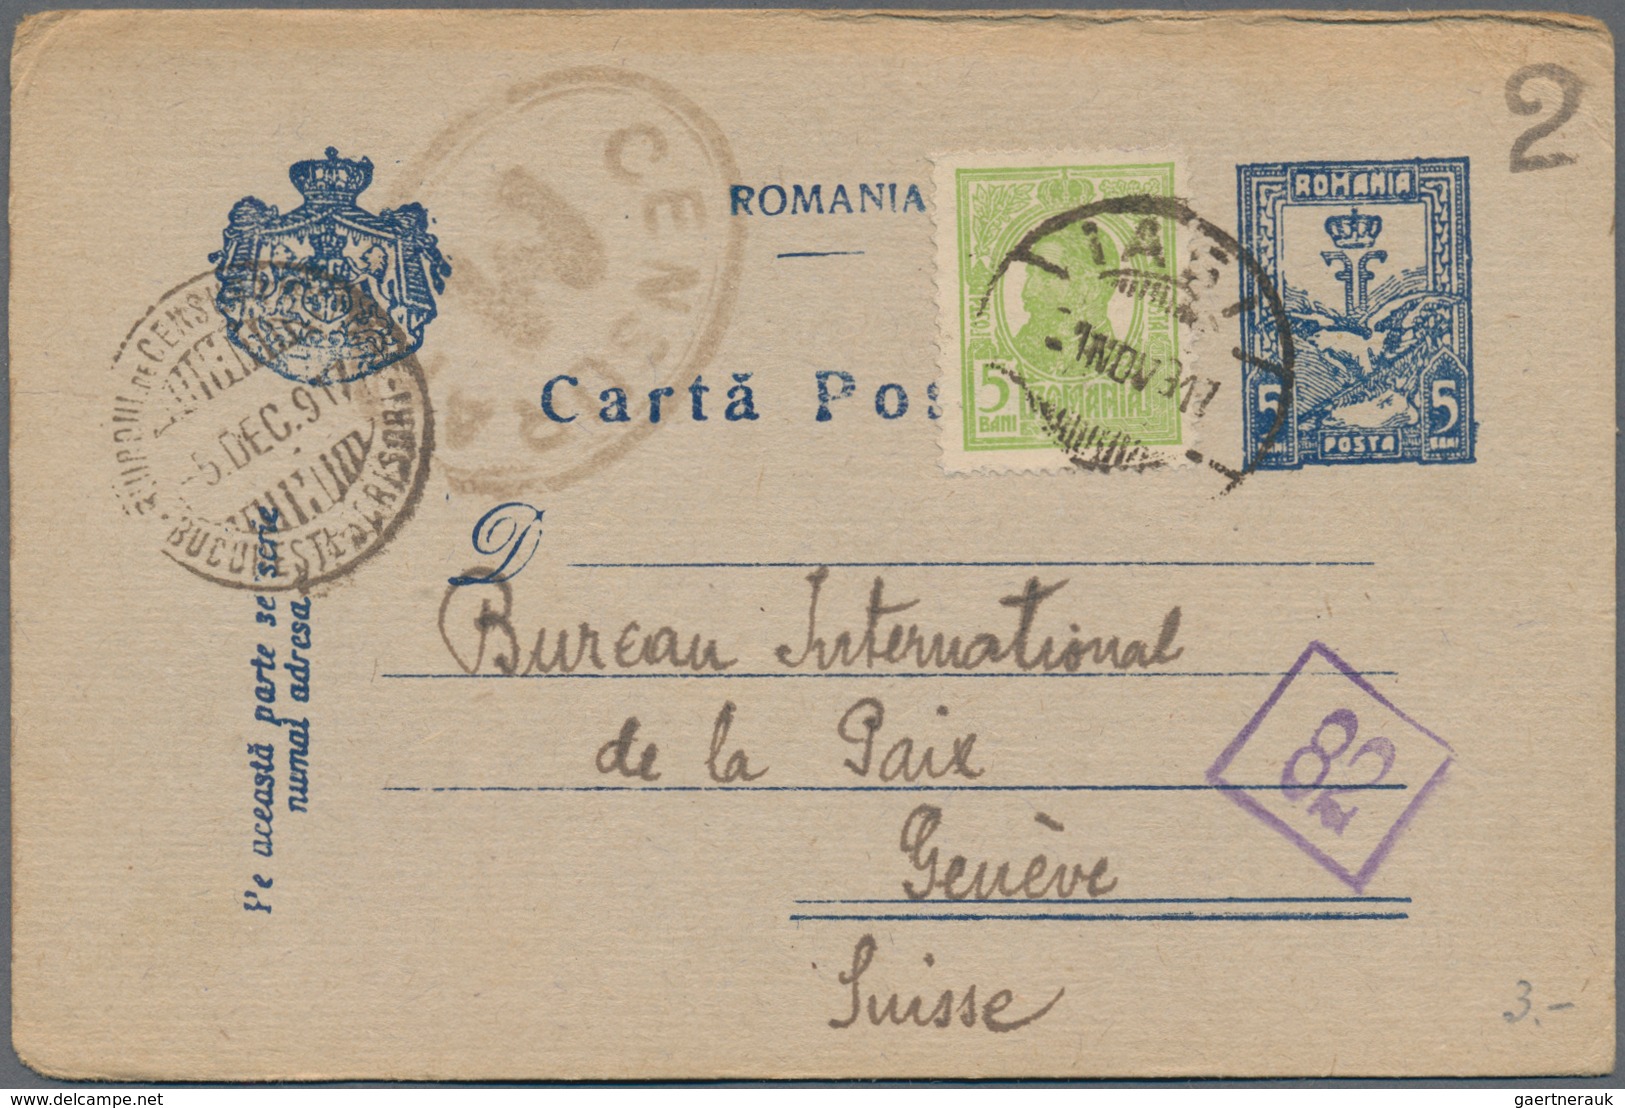 Rumänien: 1890/2003 holding of about 620 unused/CTO-used and used postal stationeries, incl. wrapper